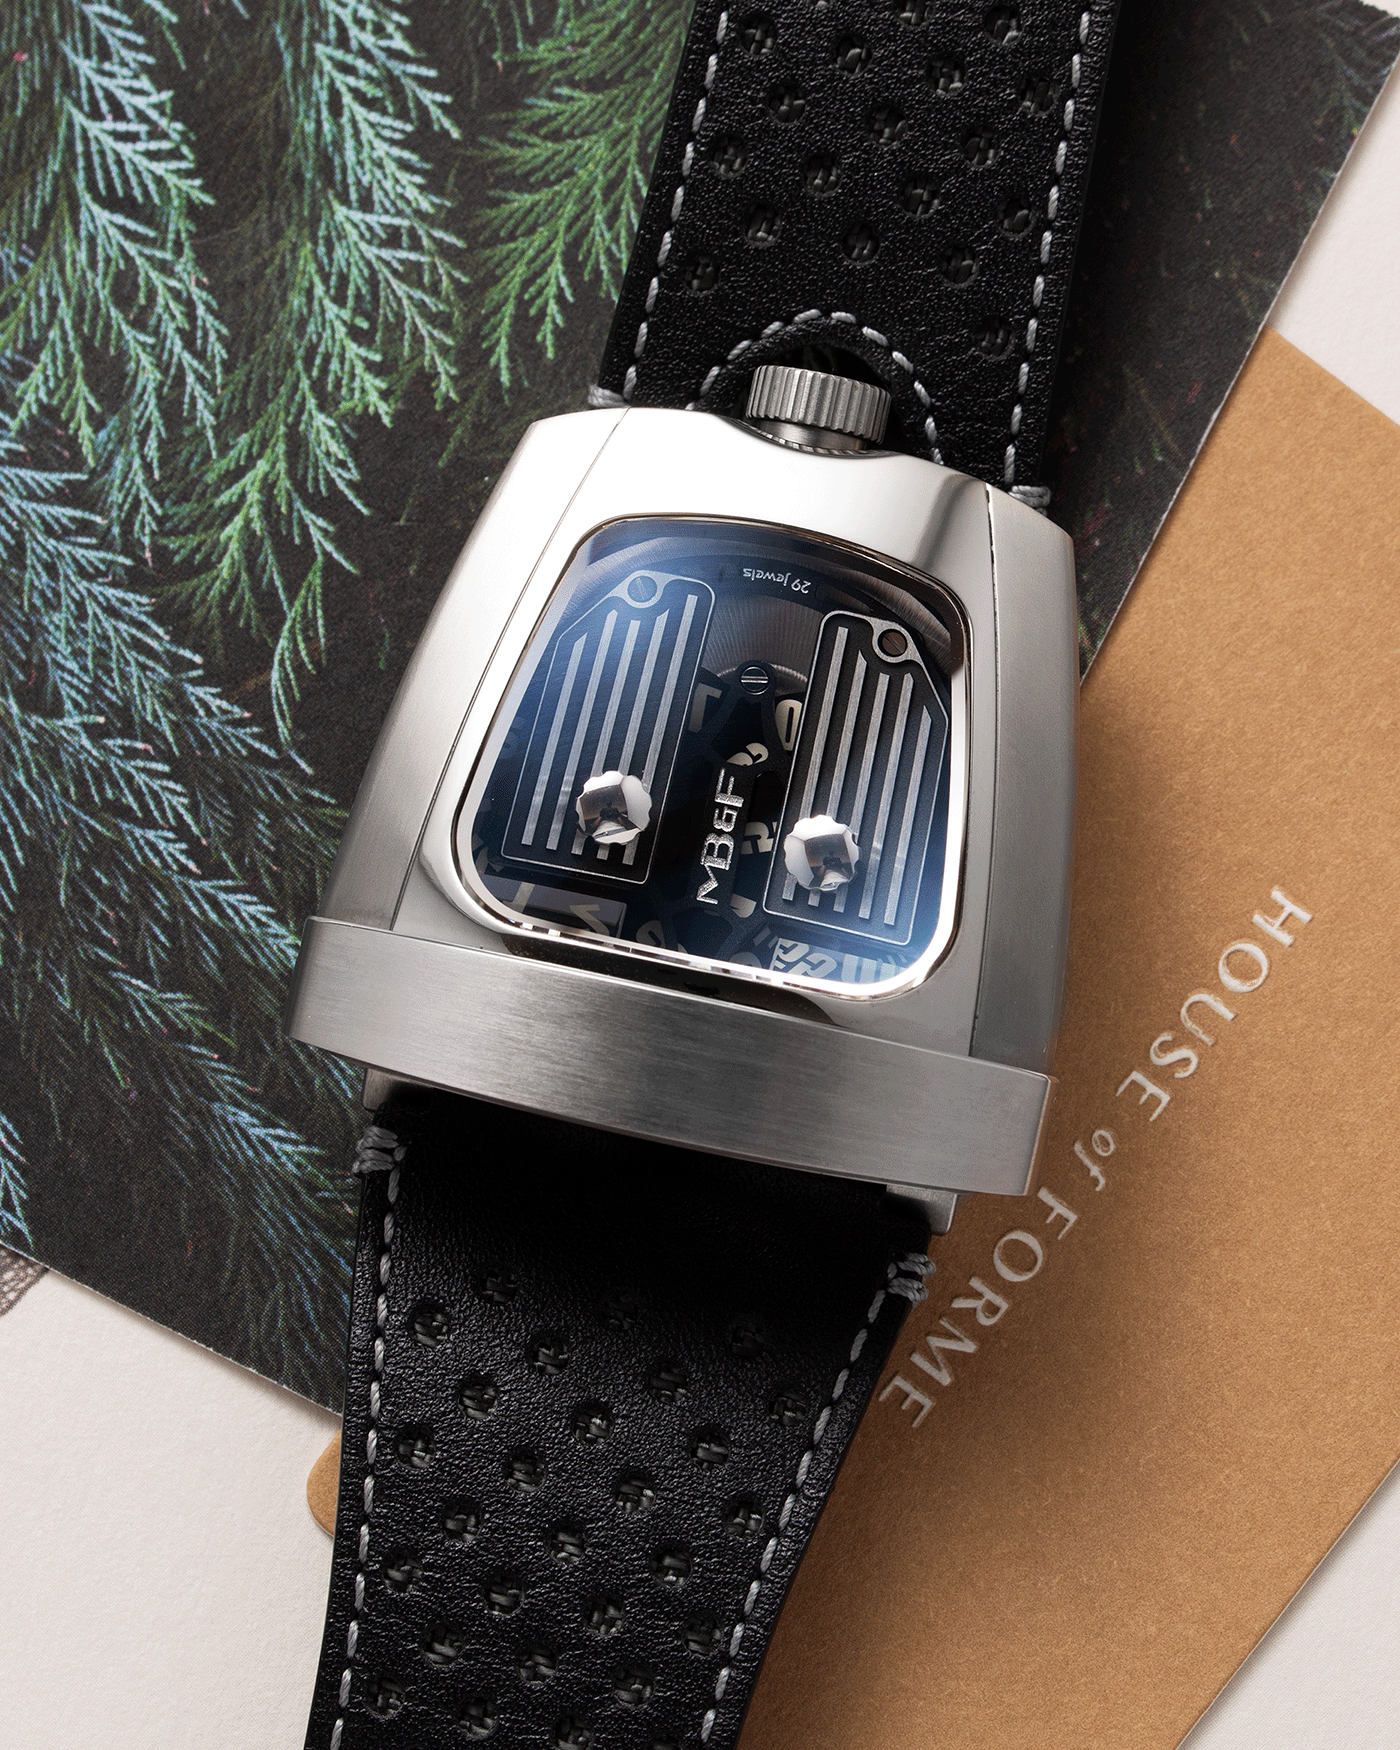 Brand: MB&F Year: 2018 Model: HMX Black Lotus 10th Anniversary Material: Stainless Steel and Titanium Movement: Selitta Based Self Winding Movement Case Diameter: 46.8 x 44.3 x 20.7 mm Bracelet/Strap: MB&F Black Leather Strap and Tang Buckle